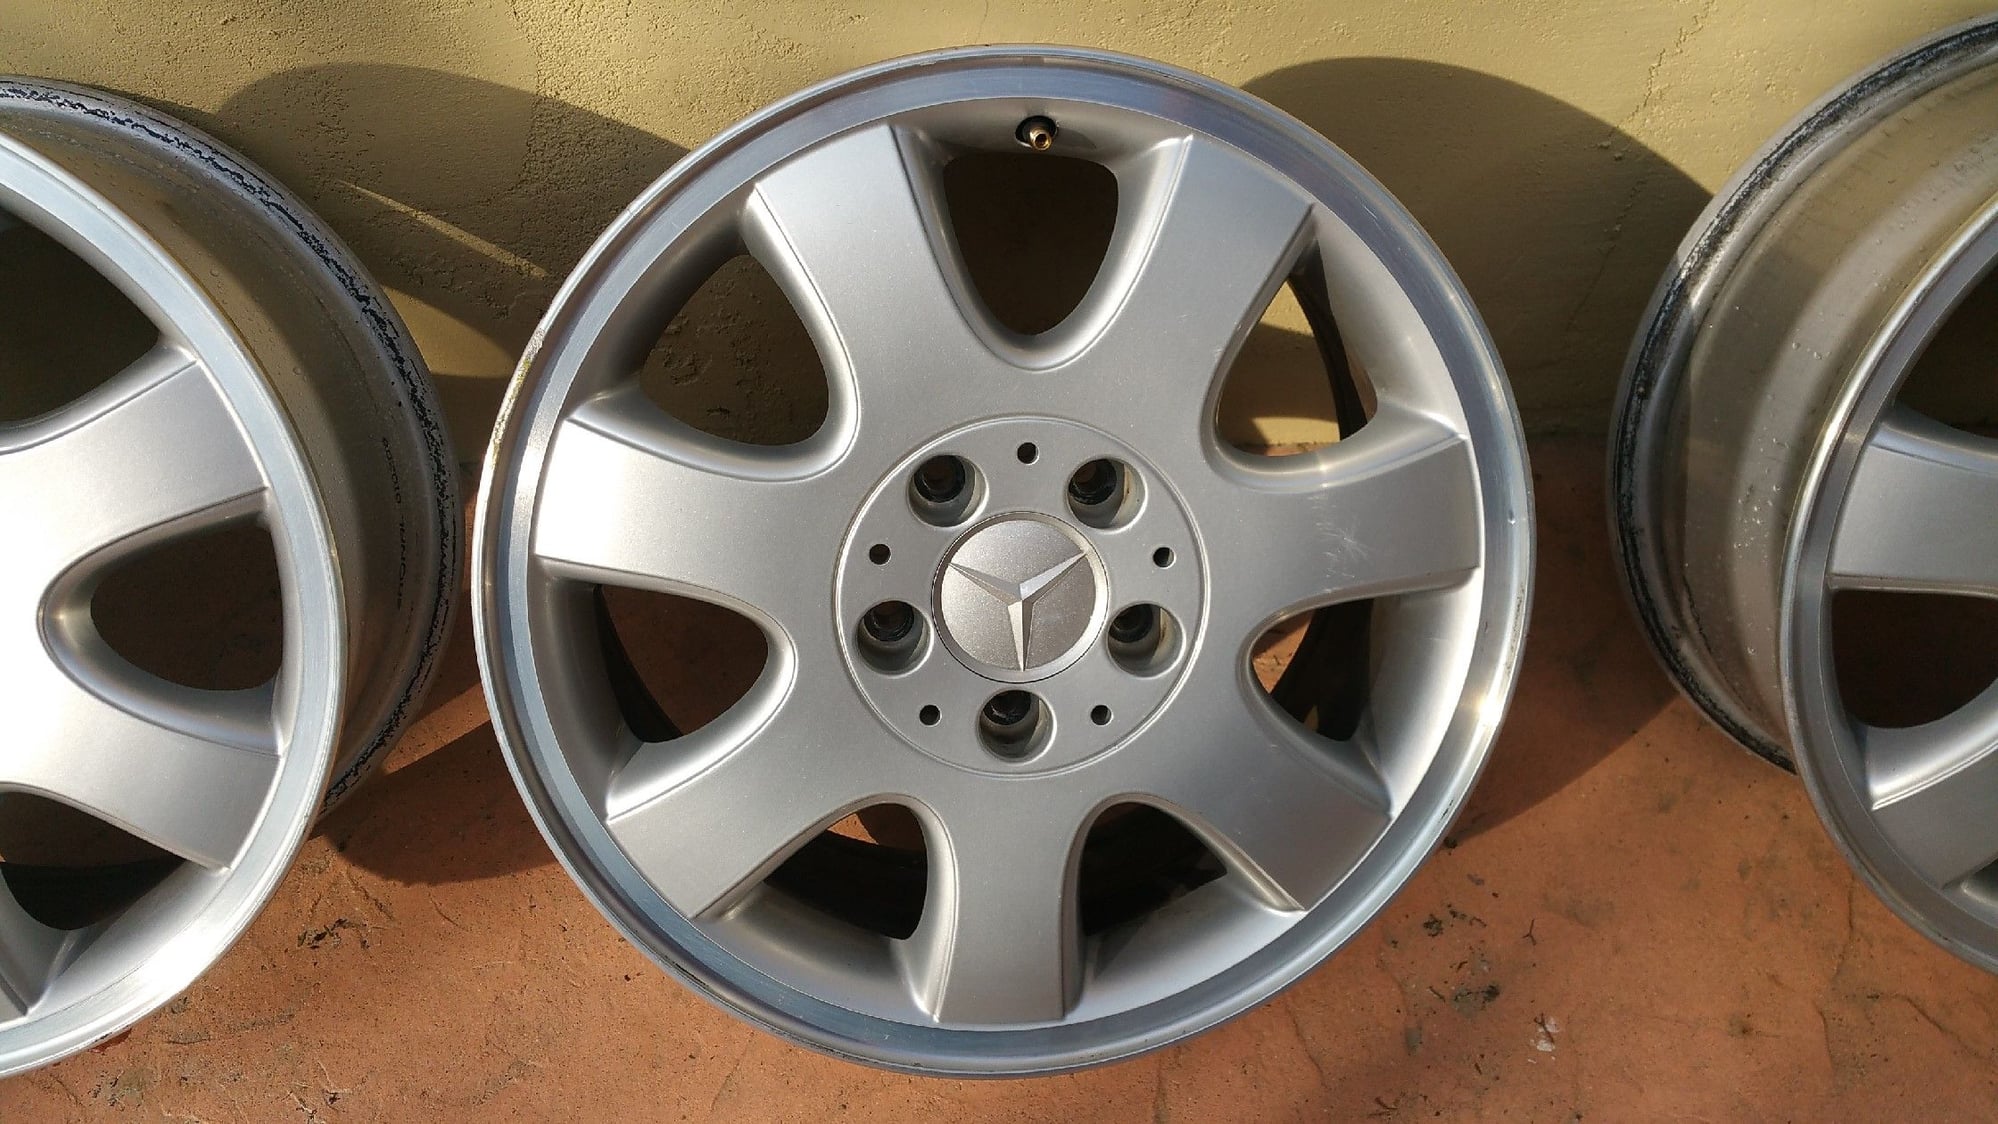 Wheels and Tires/Axles - Set of 16x7 2001 CLK wheels. - Used - 1998 to 2019 Any Make All Models - Sacramento, CA 95819, United States